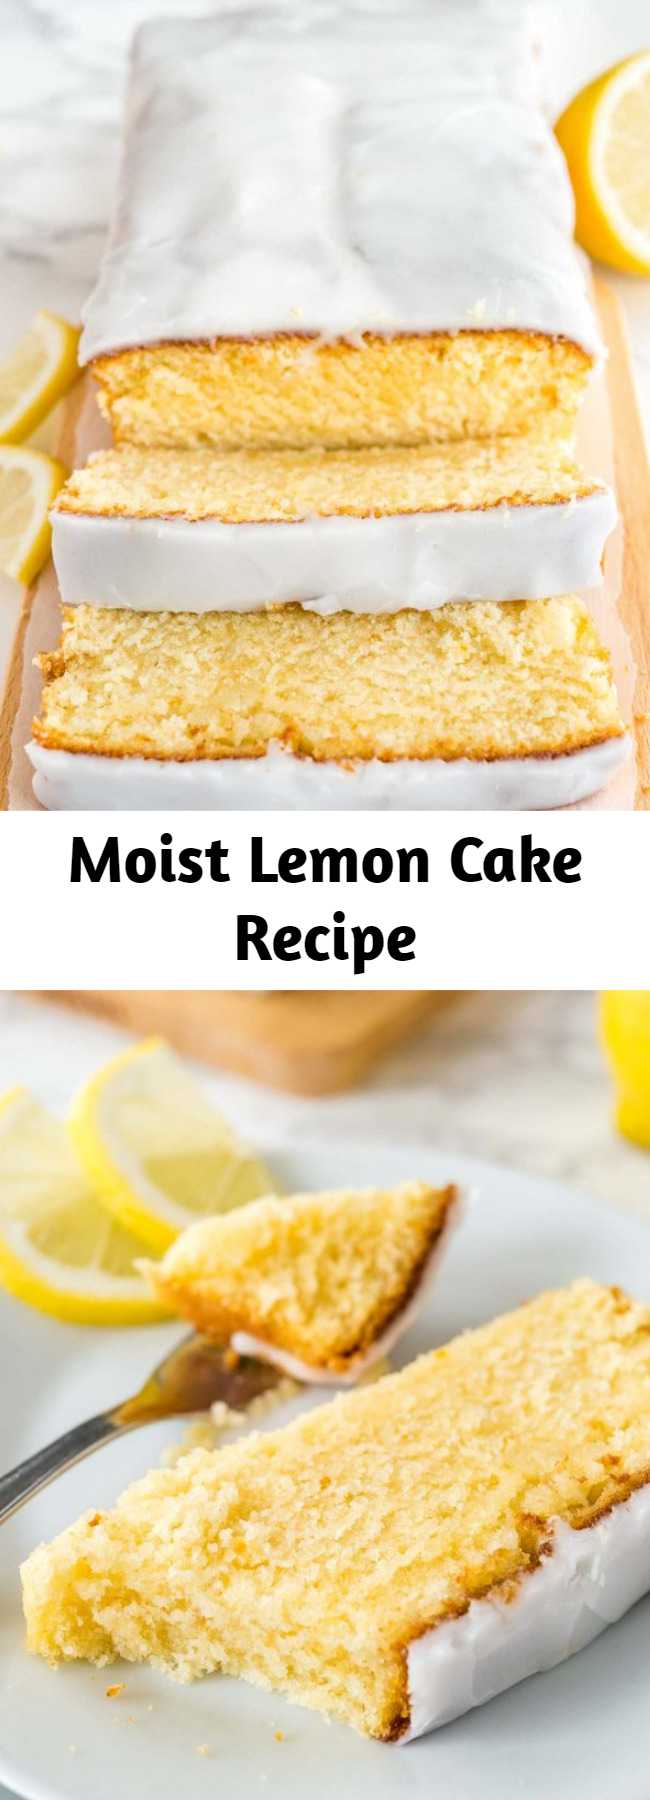 This moist Lemon Cake Recipe is fluffy, tangy and so easy to make from scratch! Every bite of this supremely moist pound cake is bursting with lemon flavor. If you like the Starbucks Lemon Loaf then you'll love this homemade lemon pound cake! #LemonCake #PoundCake